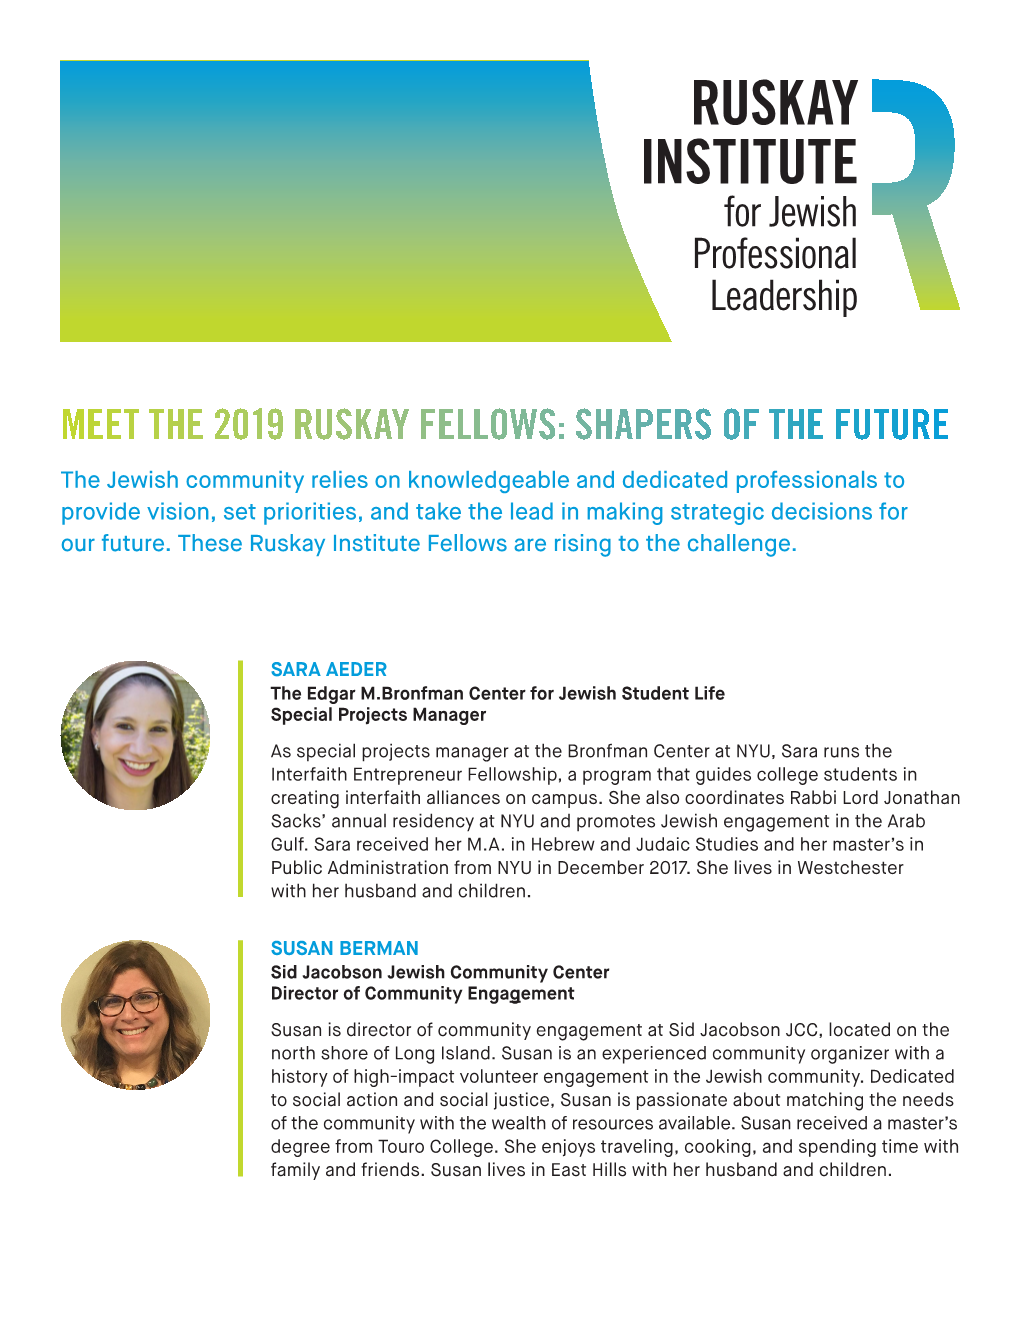 Meet the 2019 Ruskay Fellows: Shapers of the Future